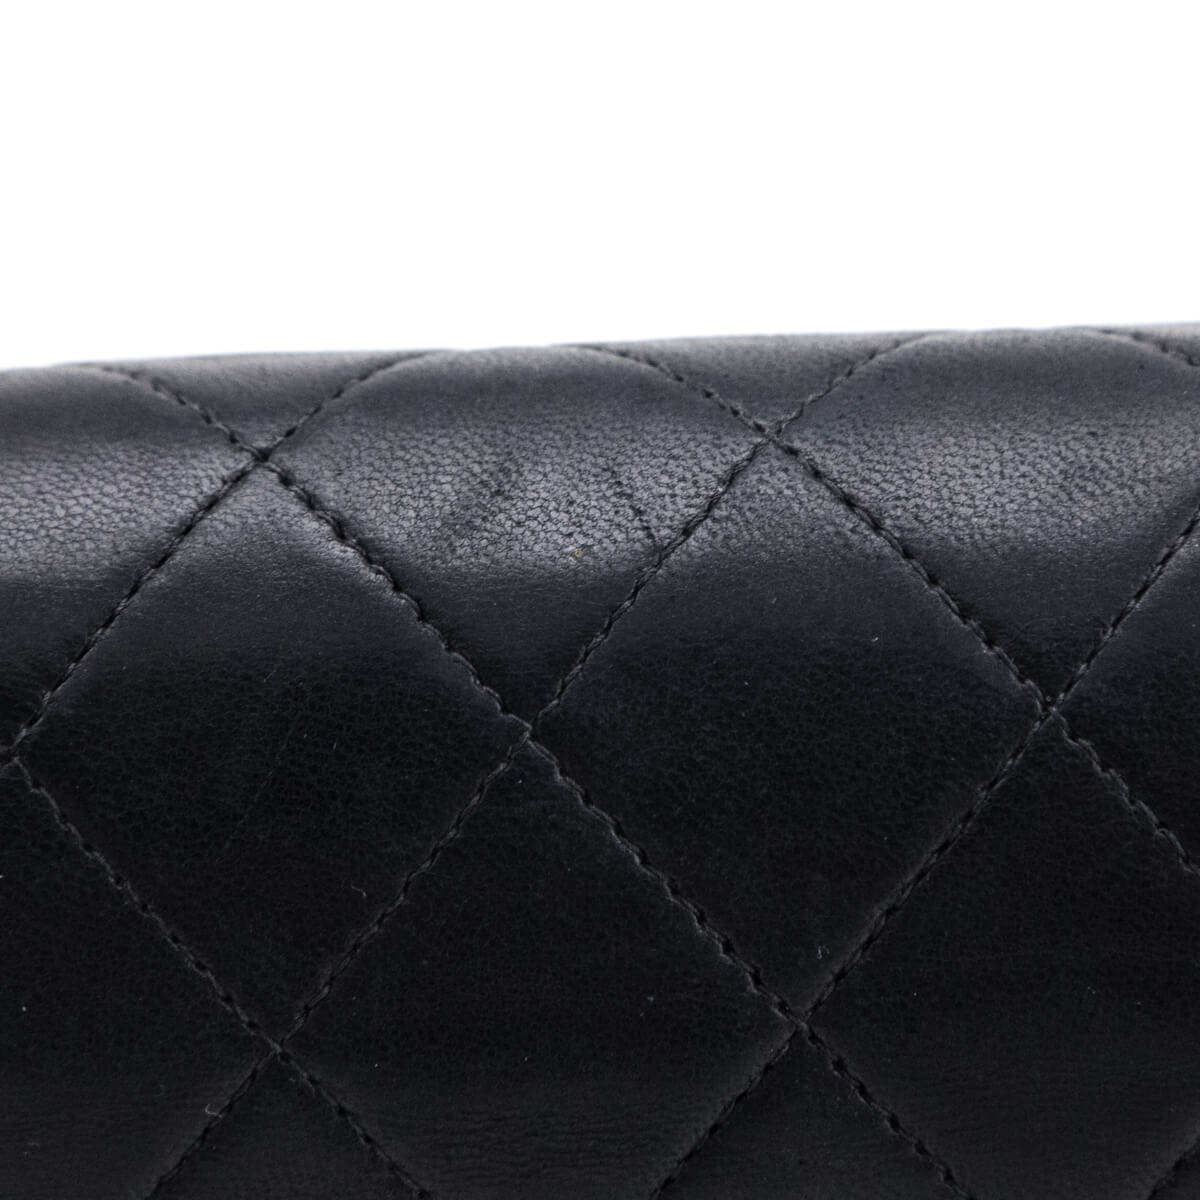 Chanel Navy Quilted Lambskin Vintage Medium Classic Double Flap Bag - Love that Bag etc - Preowned Authentic Designer Handbags & Preloved Fashions